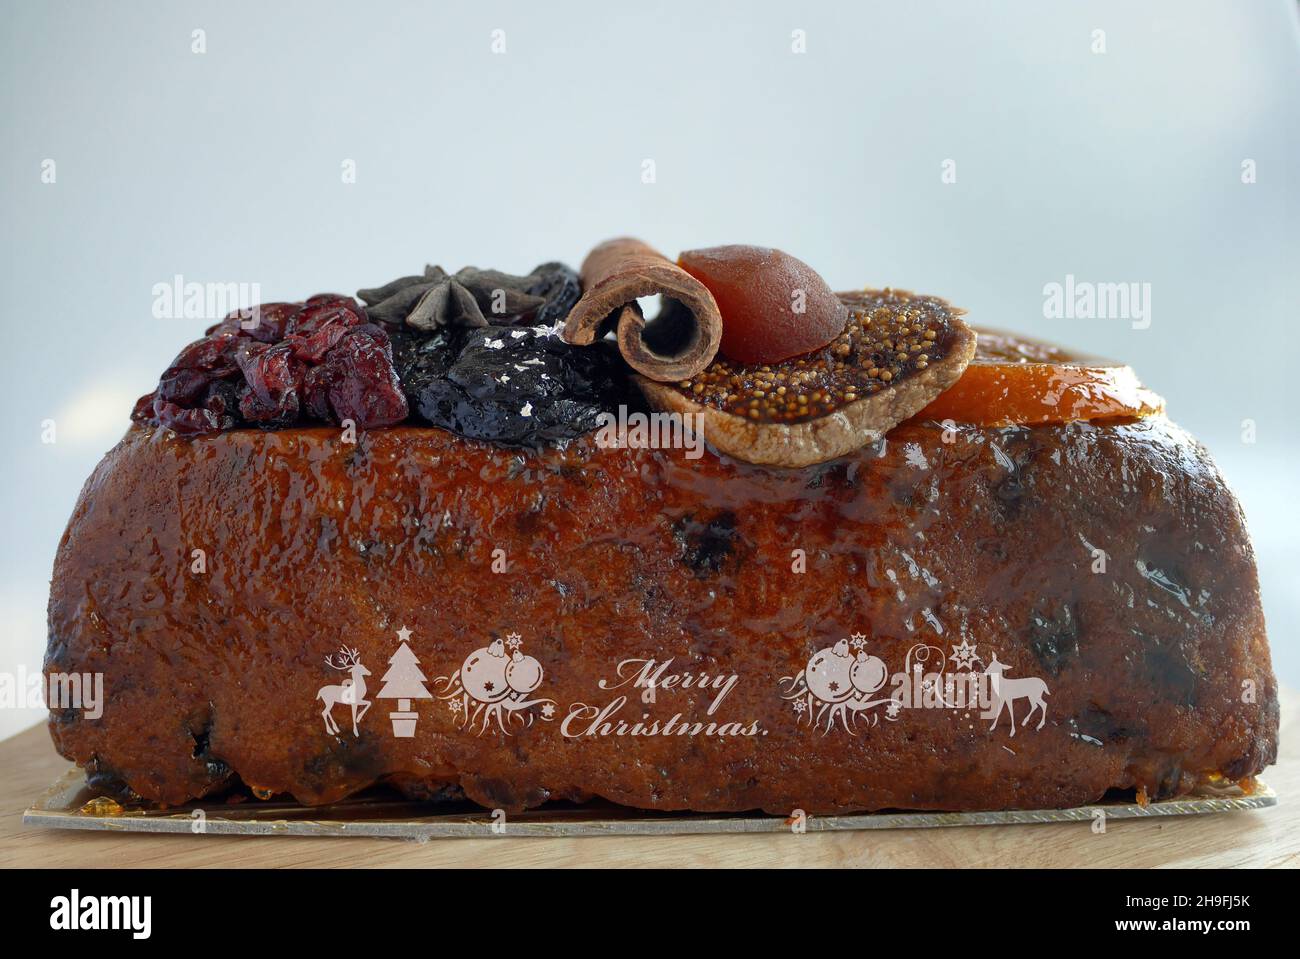 Close-up side view loaf of fruitcakes St-Germain elderflower liqueur seasons cake brown color with Merry Christmas Stock Photo